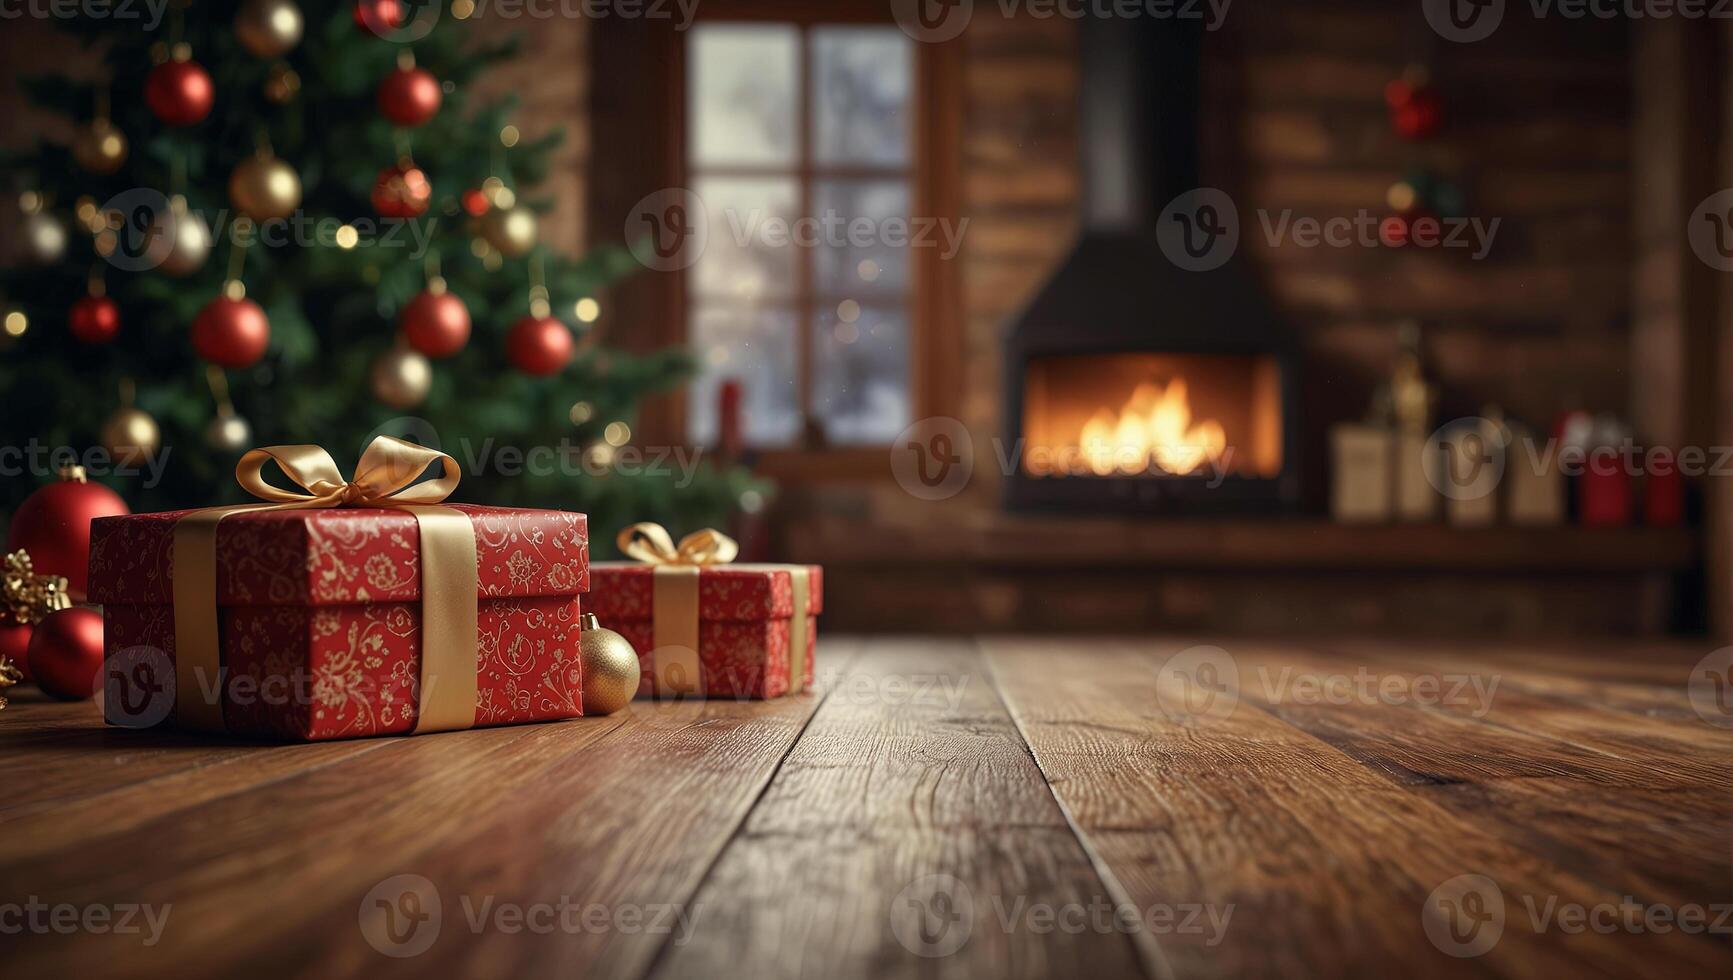 Festive blurred background with wooden surface. Gift box with golden bow, fireplace, Christmas tree. Winter celebration concept. Space for text. For poster, greeting card, advertising photo